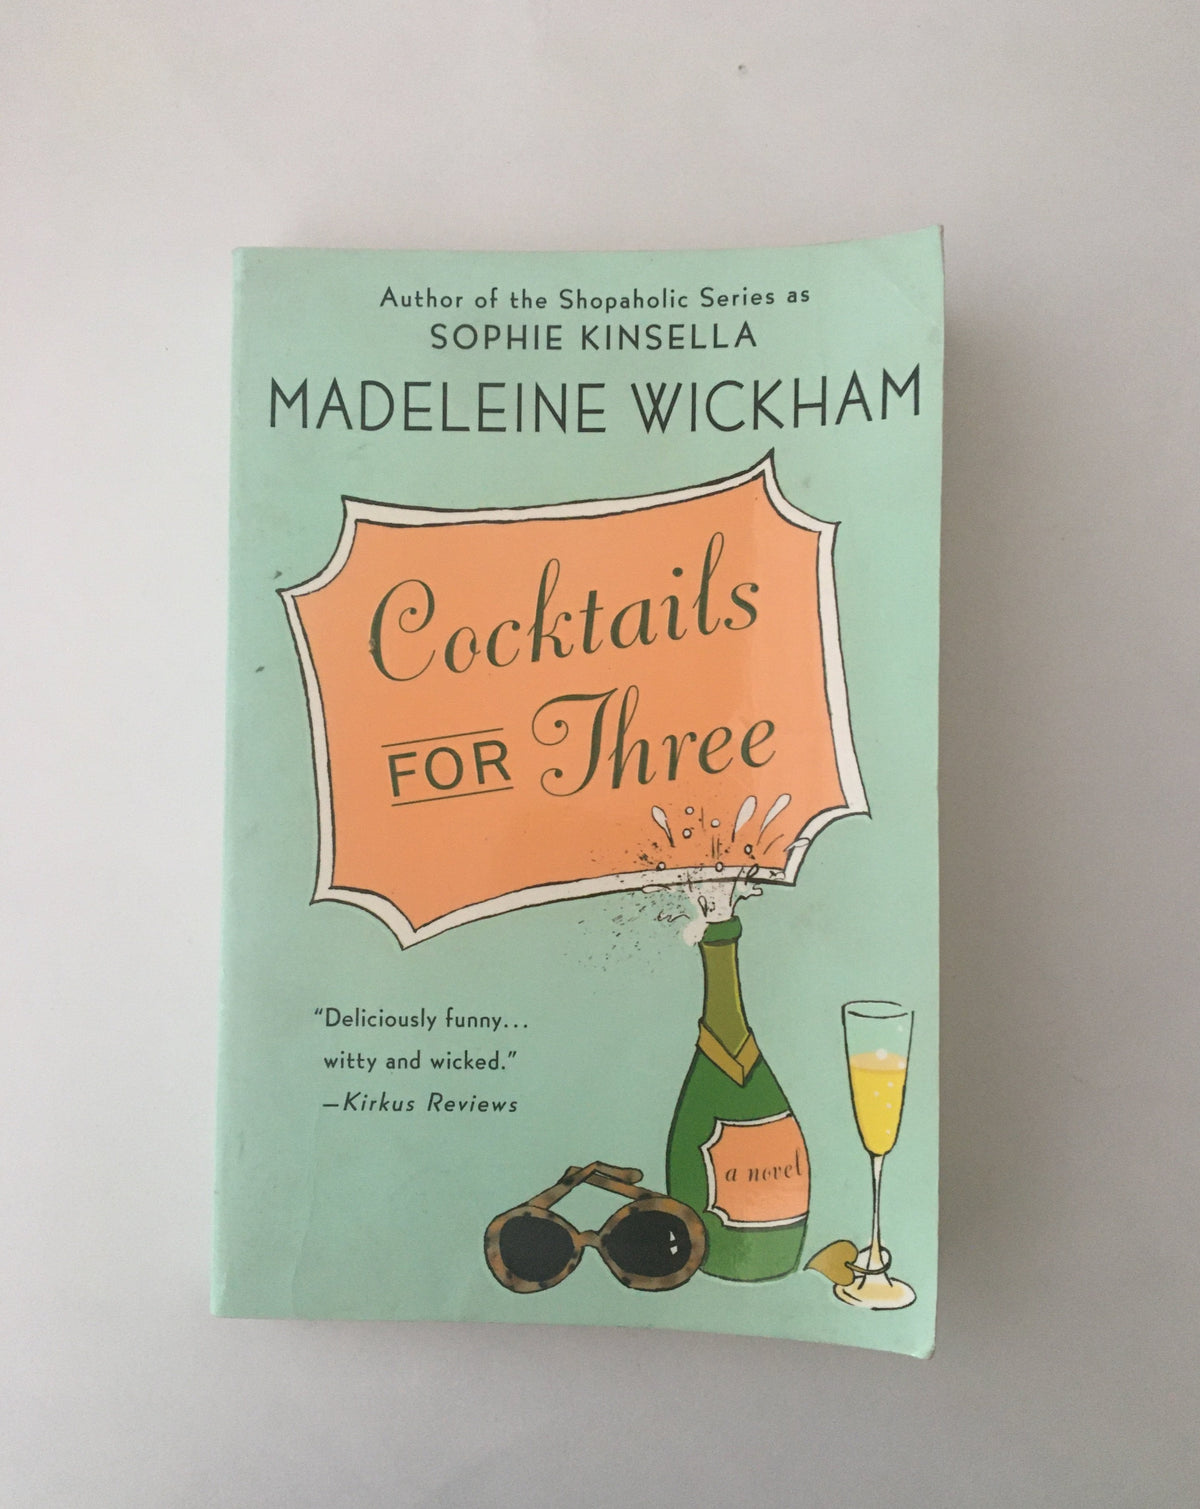 Cocktails for Three by Madeline Wickham (aka Sophie Kinsella)